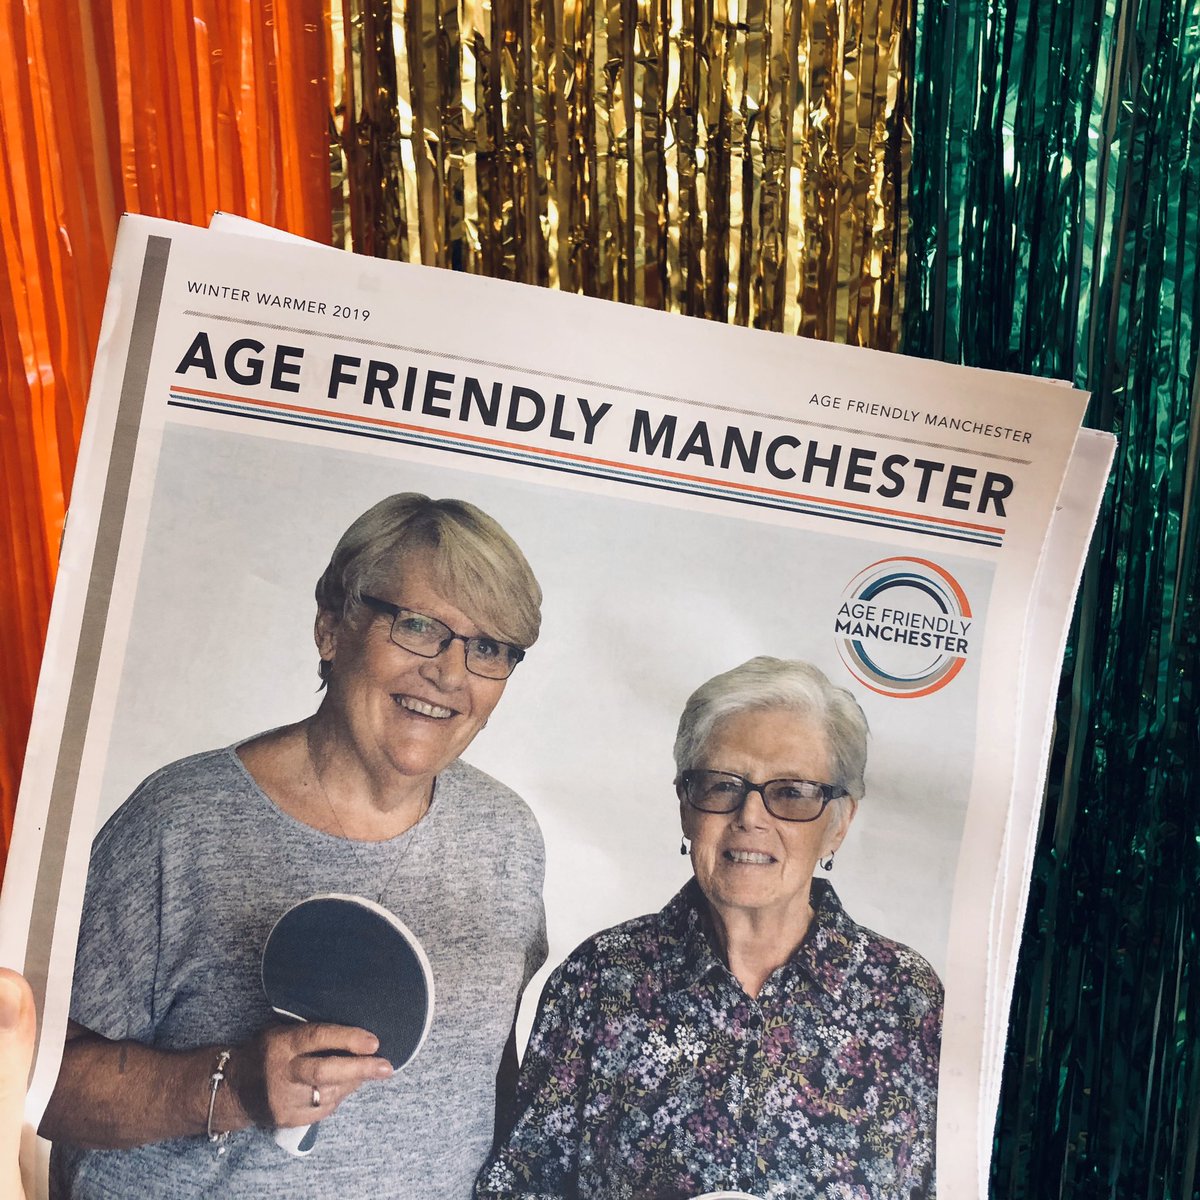 Copies of the latest Age Friendly Manchester newspaper @MCC_AFMTeam are now available from @LGBTfdn’s tinsel-coated reception as well as making its way round Manchester’s libraries, leisure centres, parks + more. #PrideinAgeing features! 🏳️‍🌈